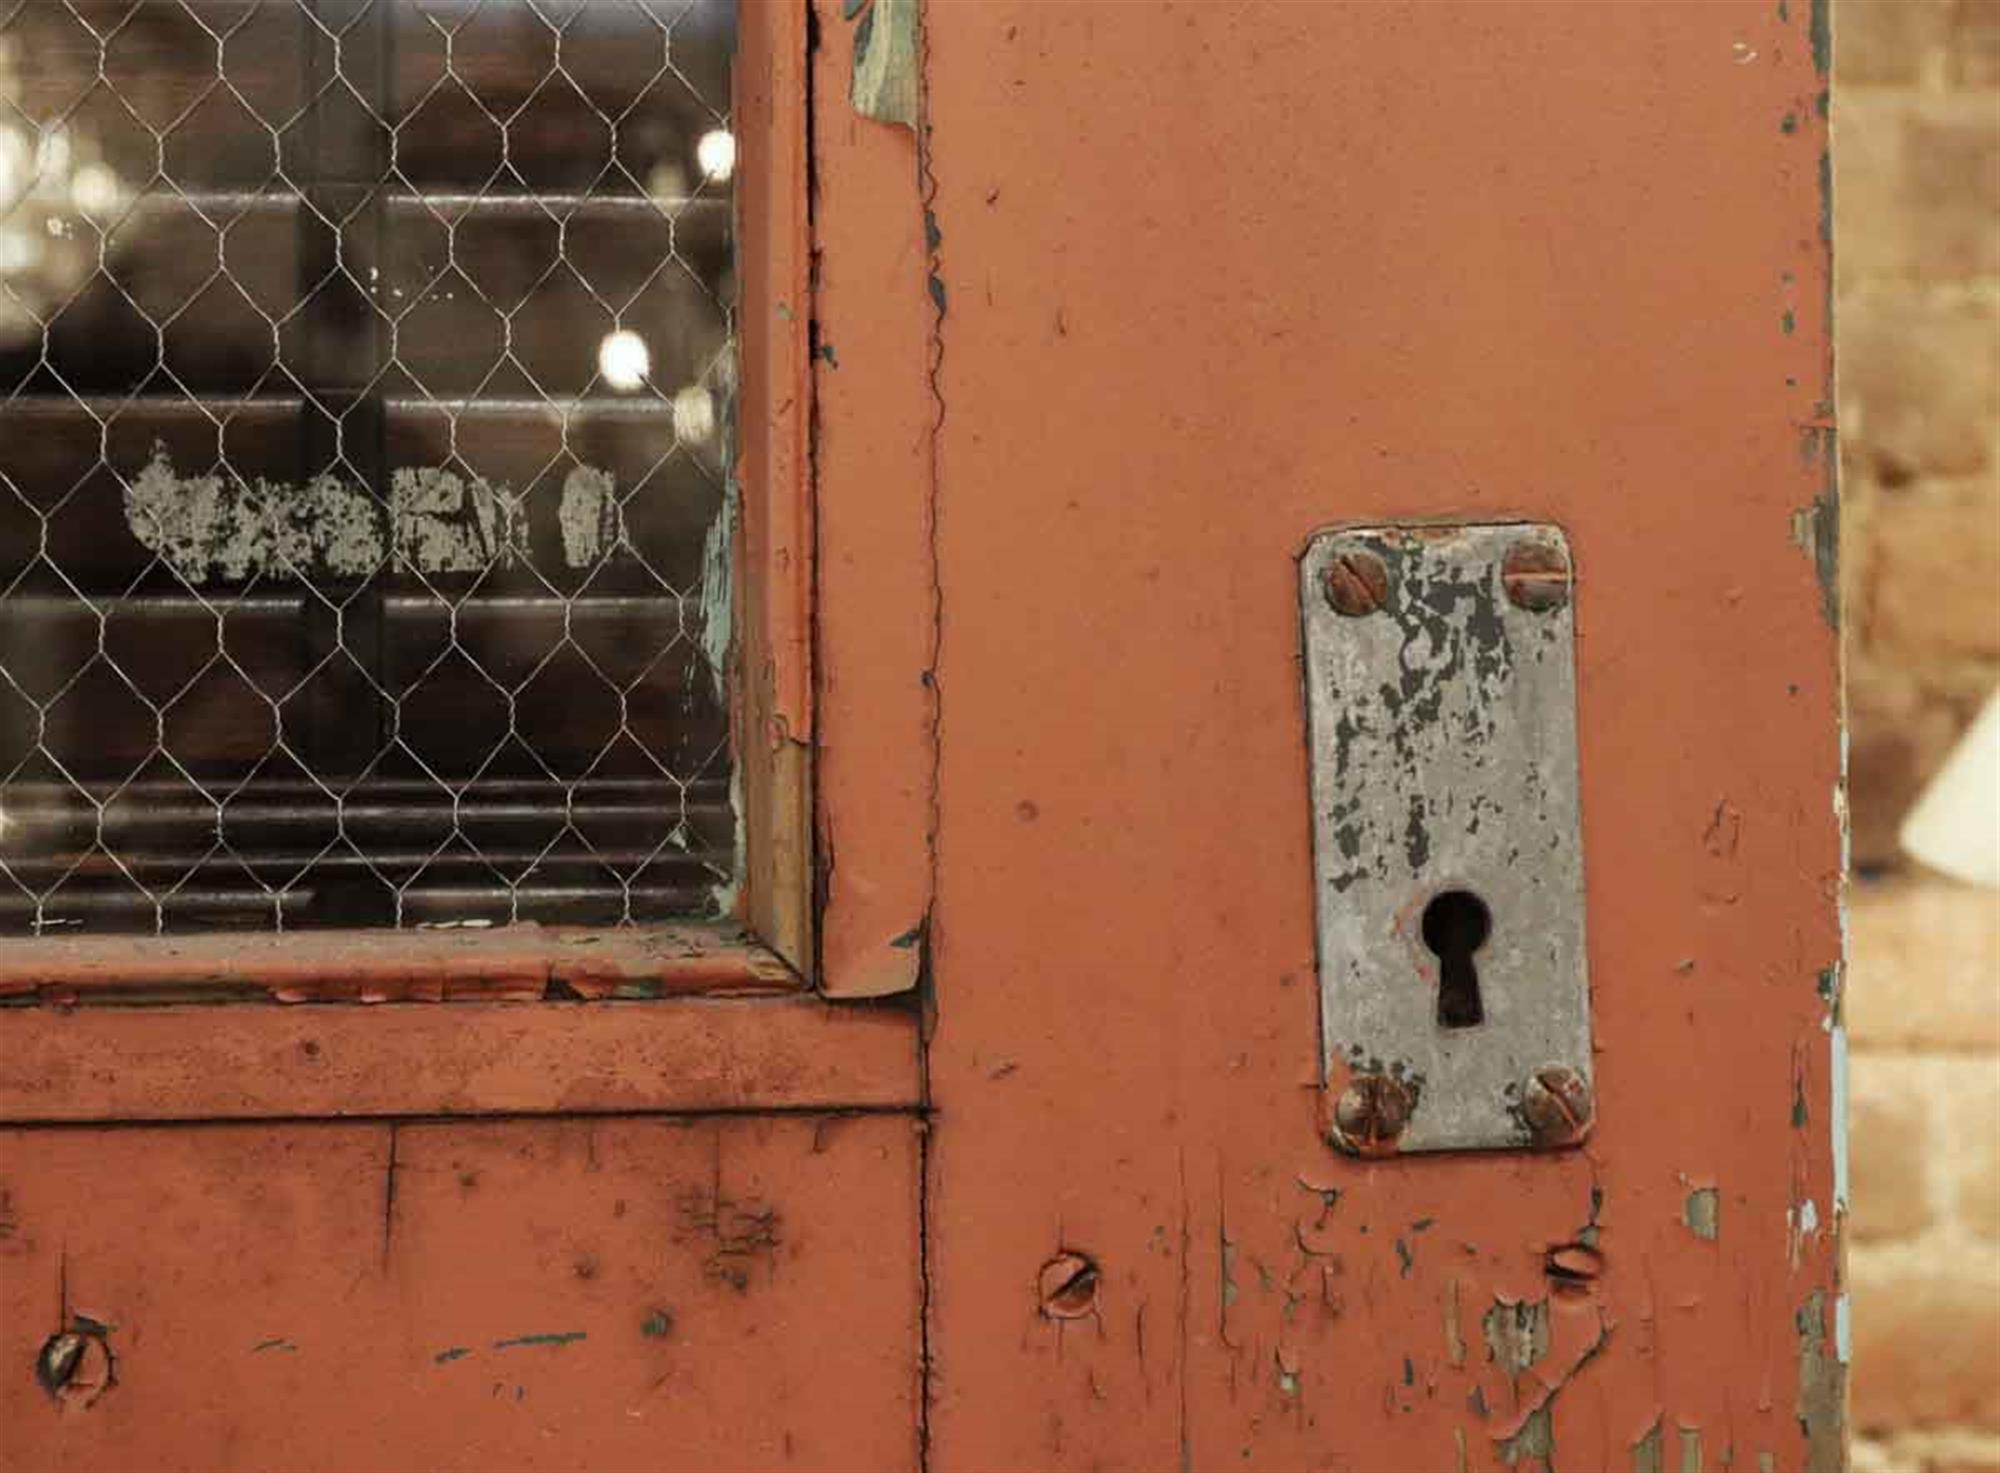 From 1930. Four chicken wire glass windows enhance this solid wood exterior Arts and Crafts exterior industrial door with original paint. The exterior has two decorative raised braces with steel rivets. It is pinkish orange on one side and aqua blue